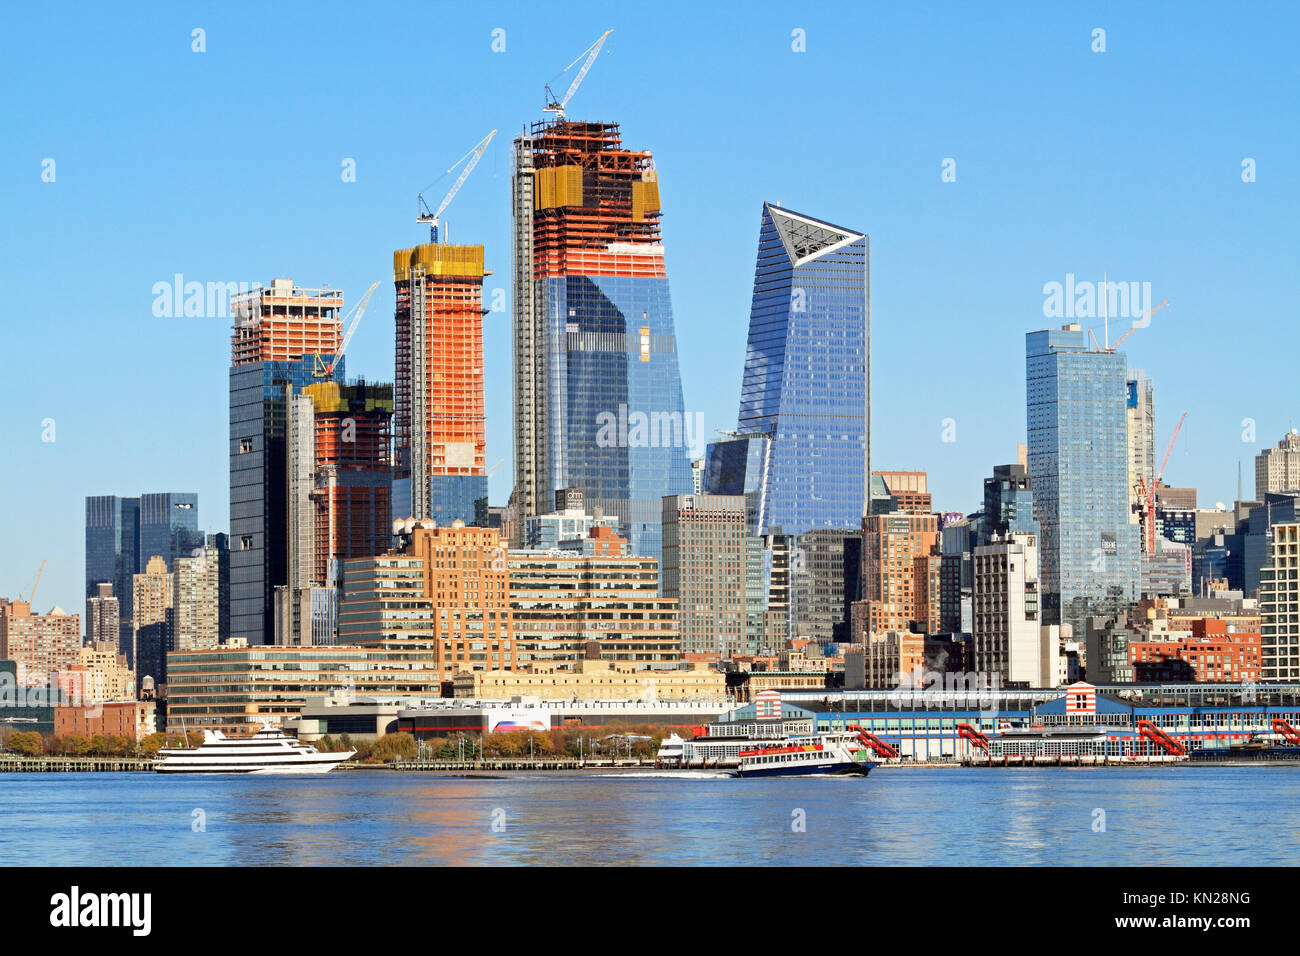 The construction of the Hudson Yards complex in New York City, USA Stock Photo